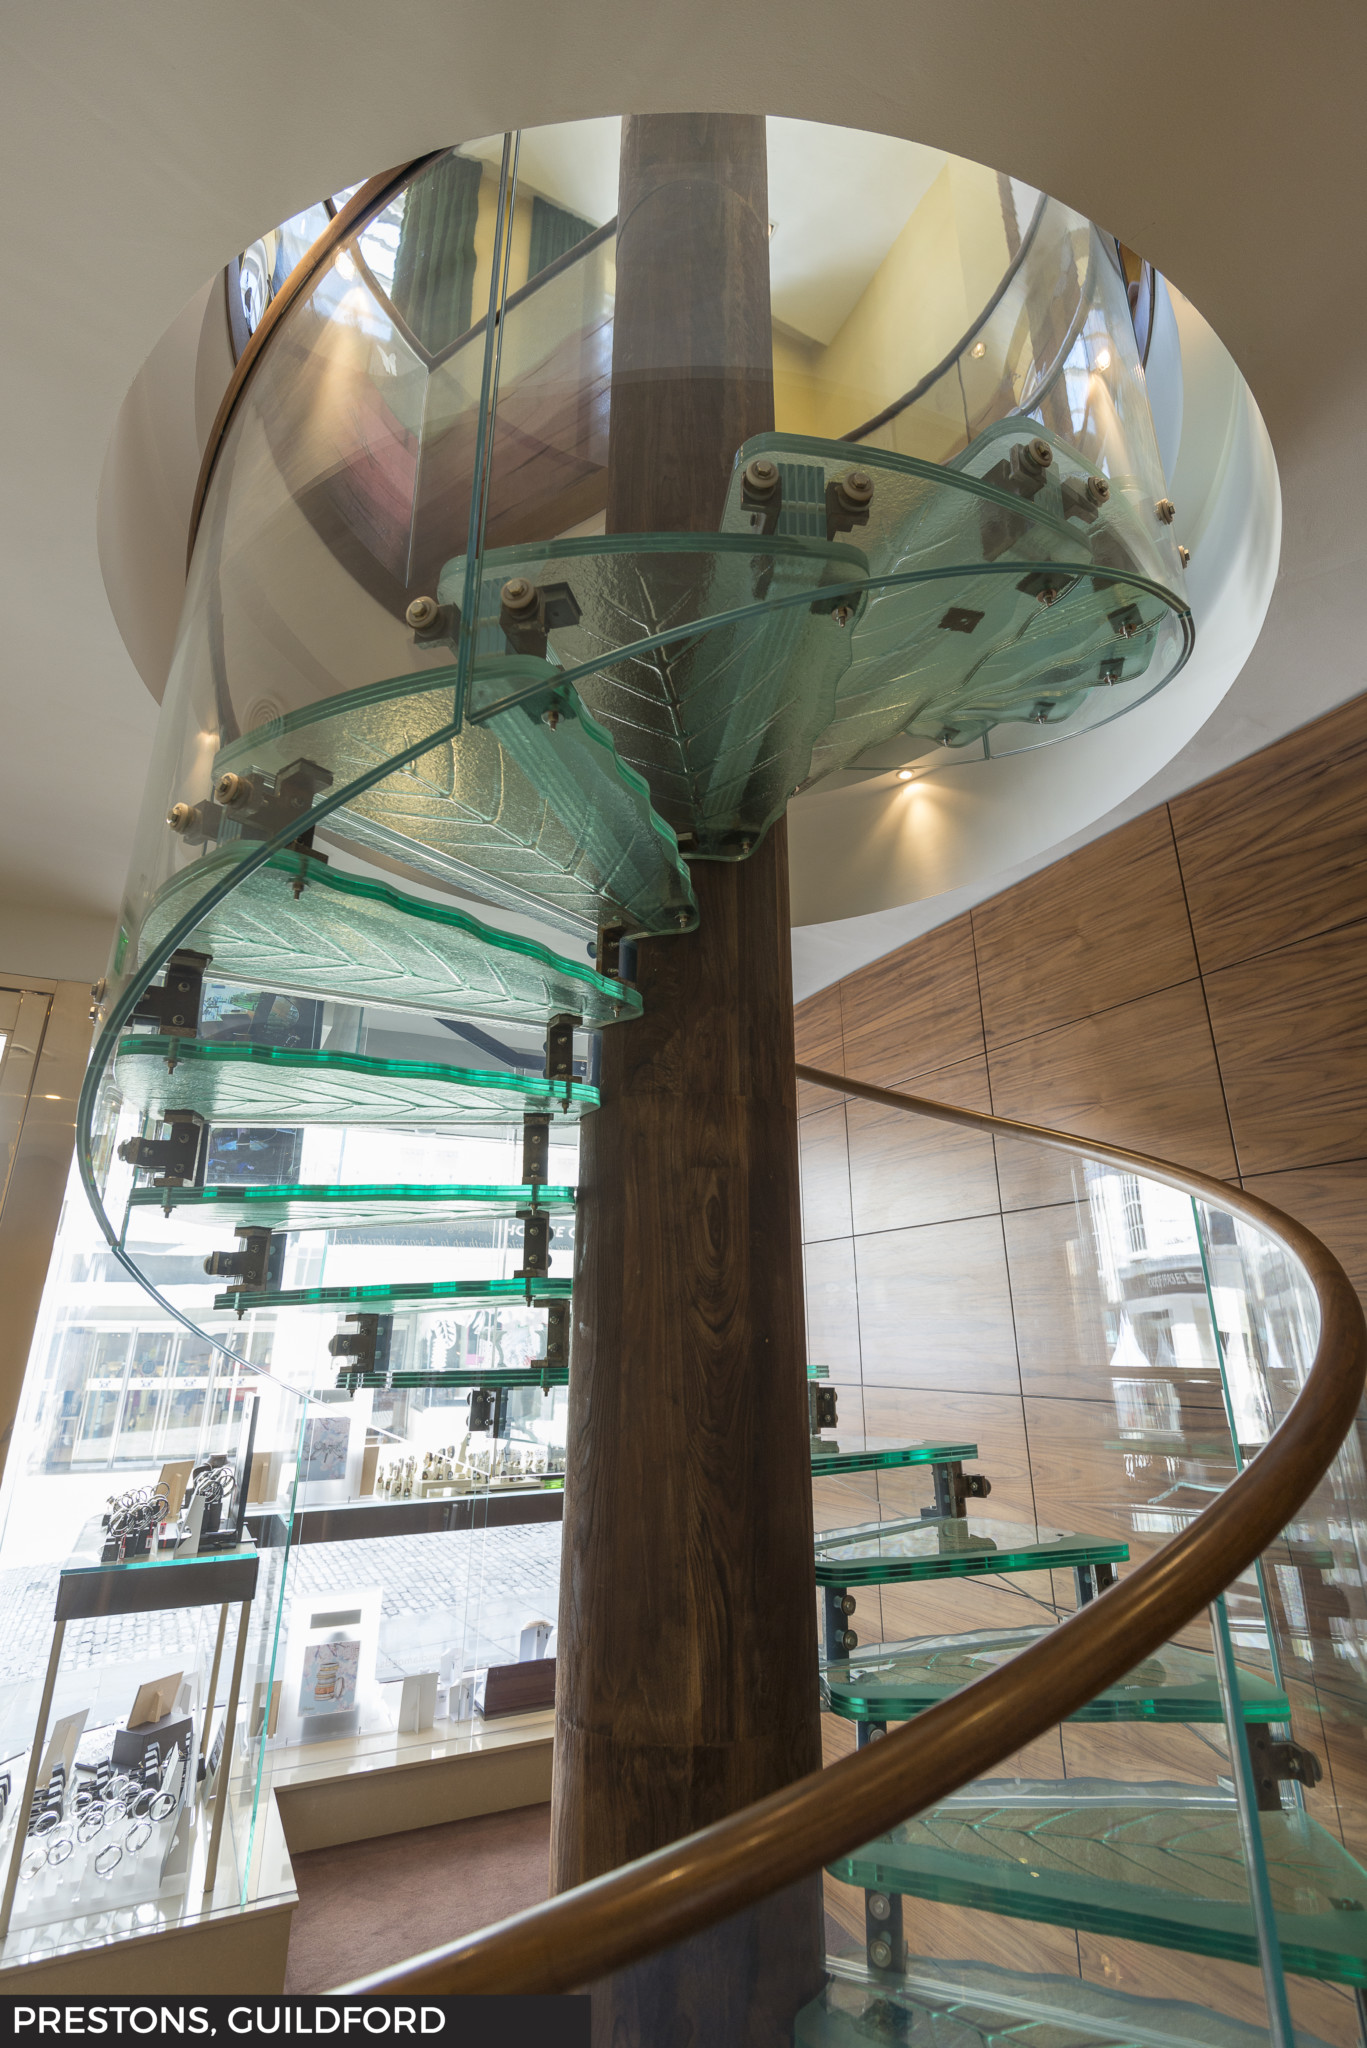 A striking spiral glass staircase connects the ground and first floors at prestons in guildford.